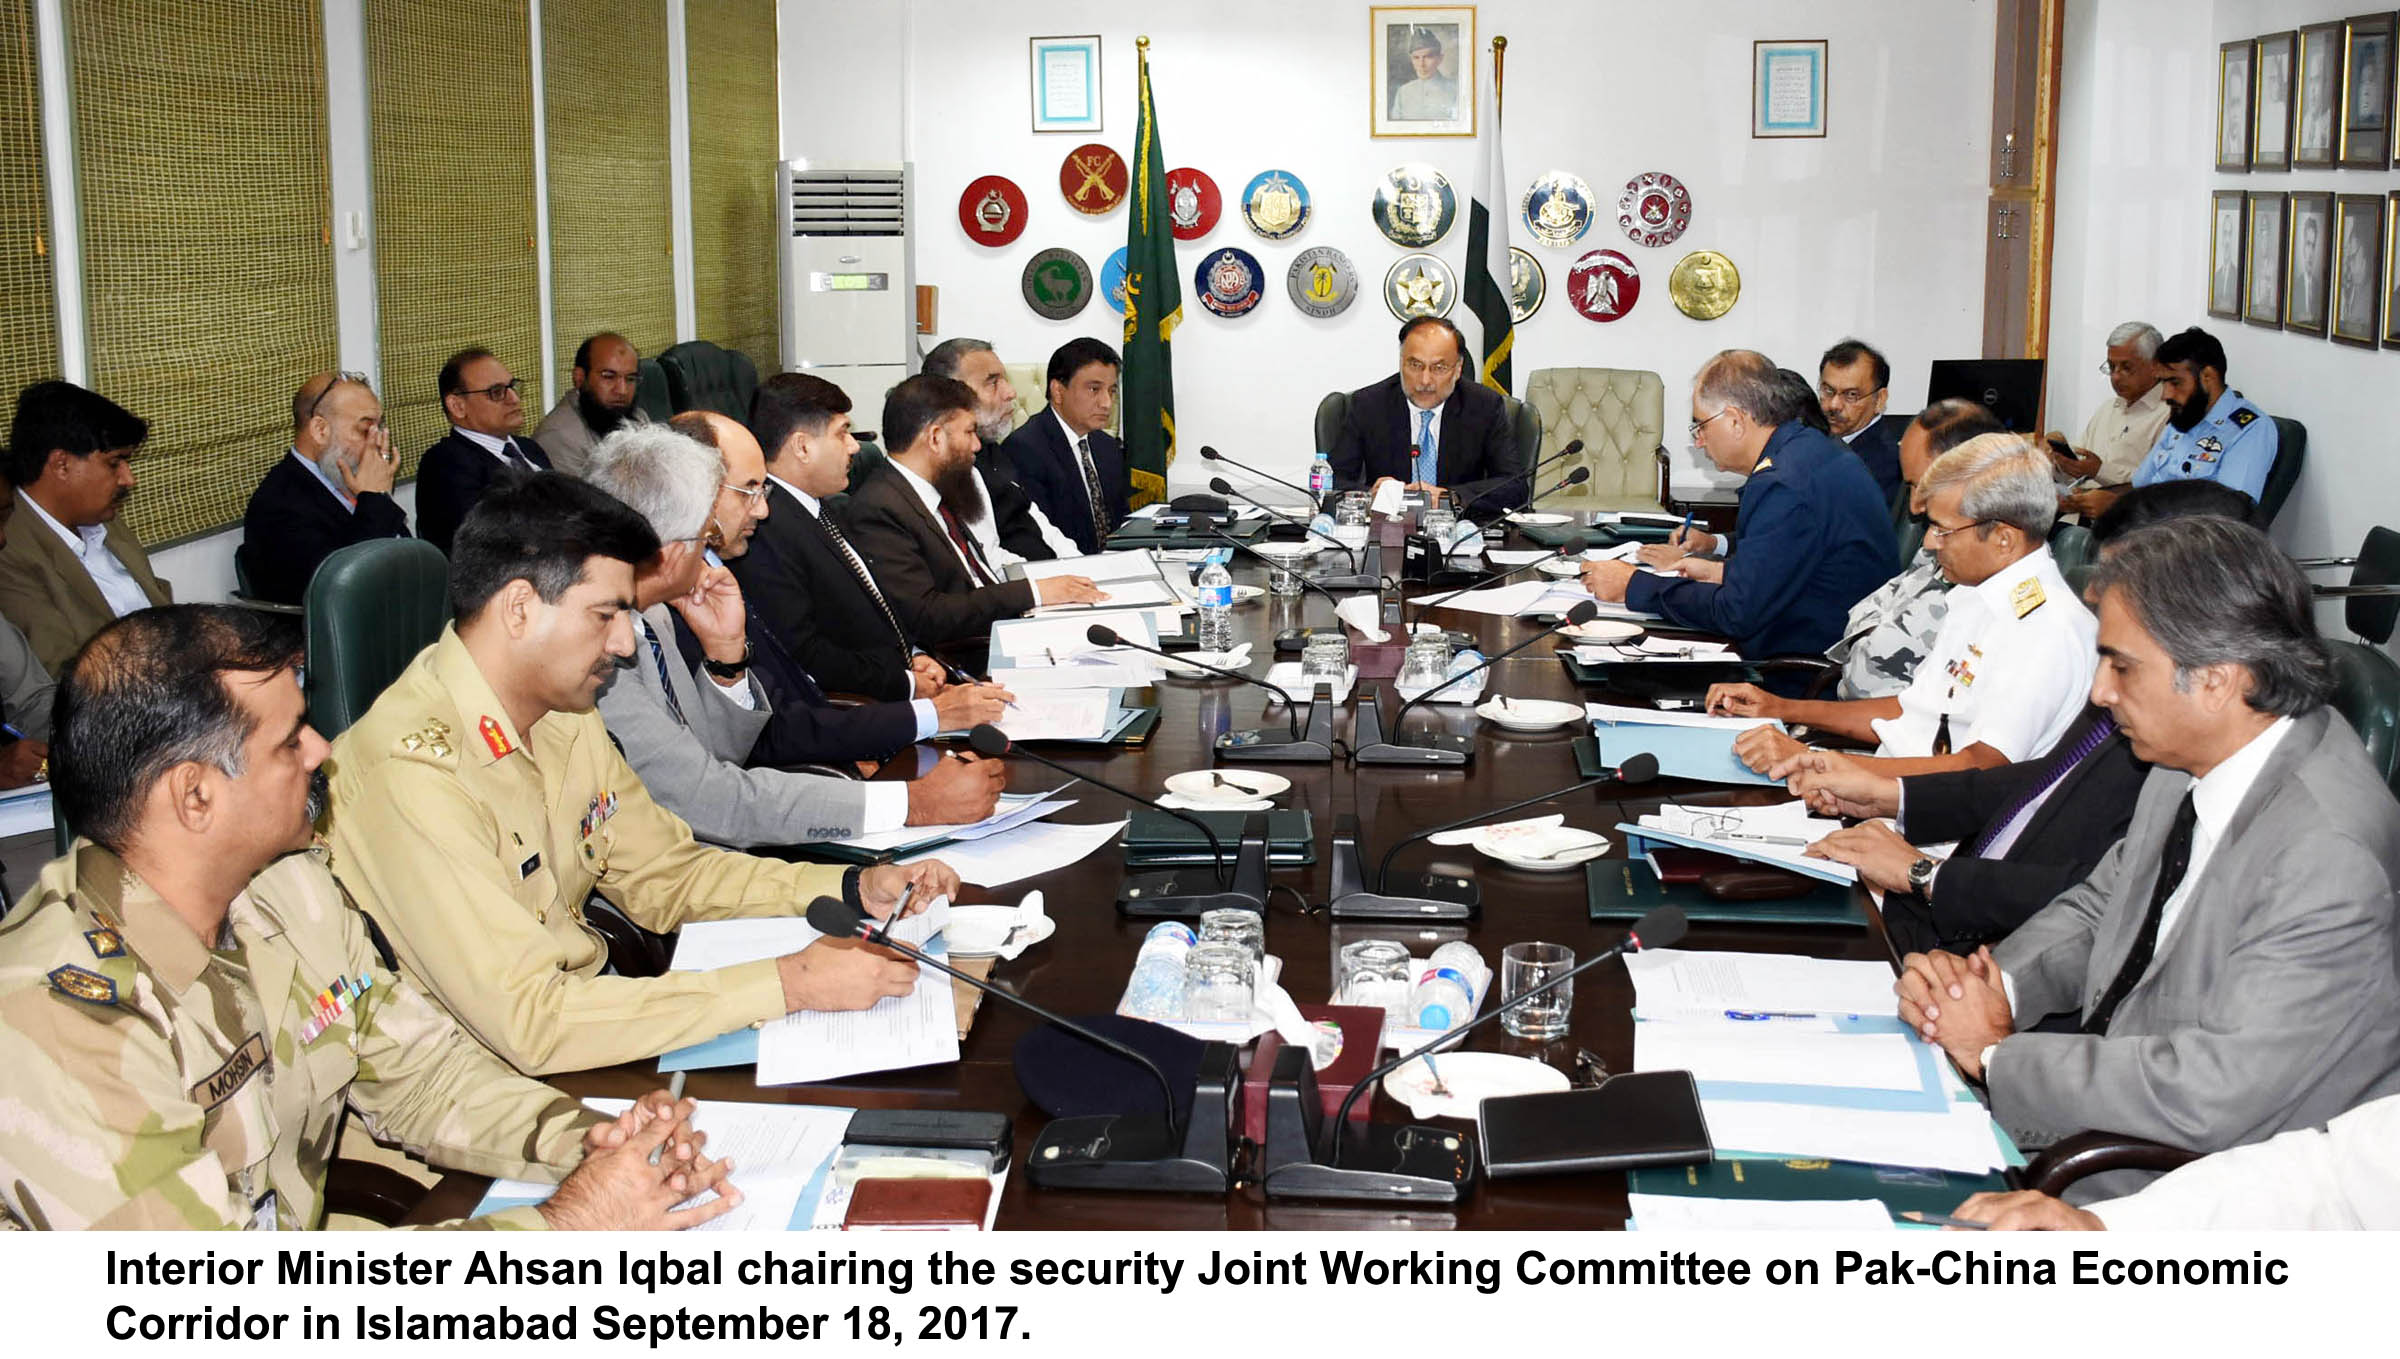 Security Joint Working Committee Meeting on CPEC on 18 September 2017